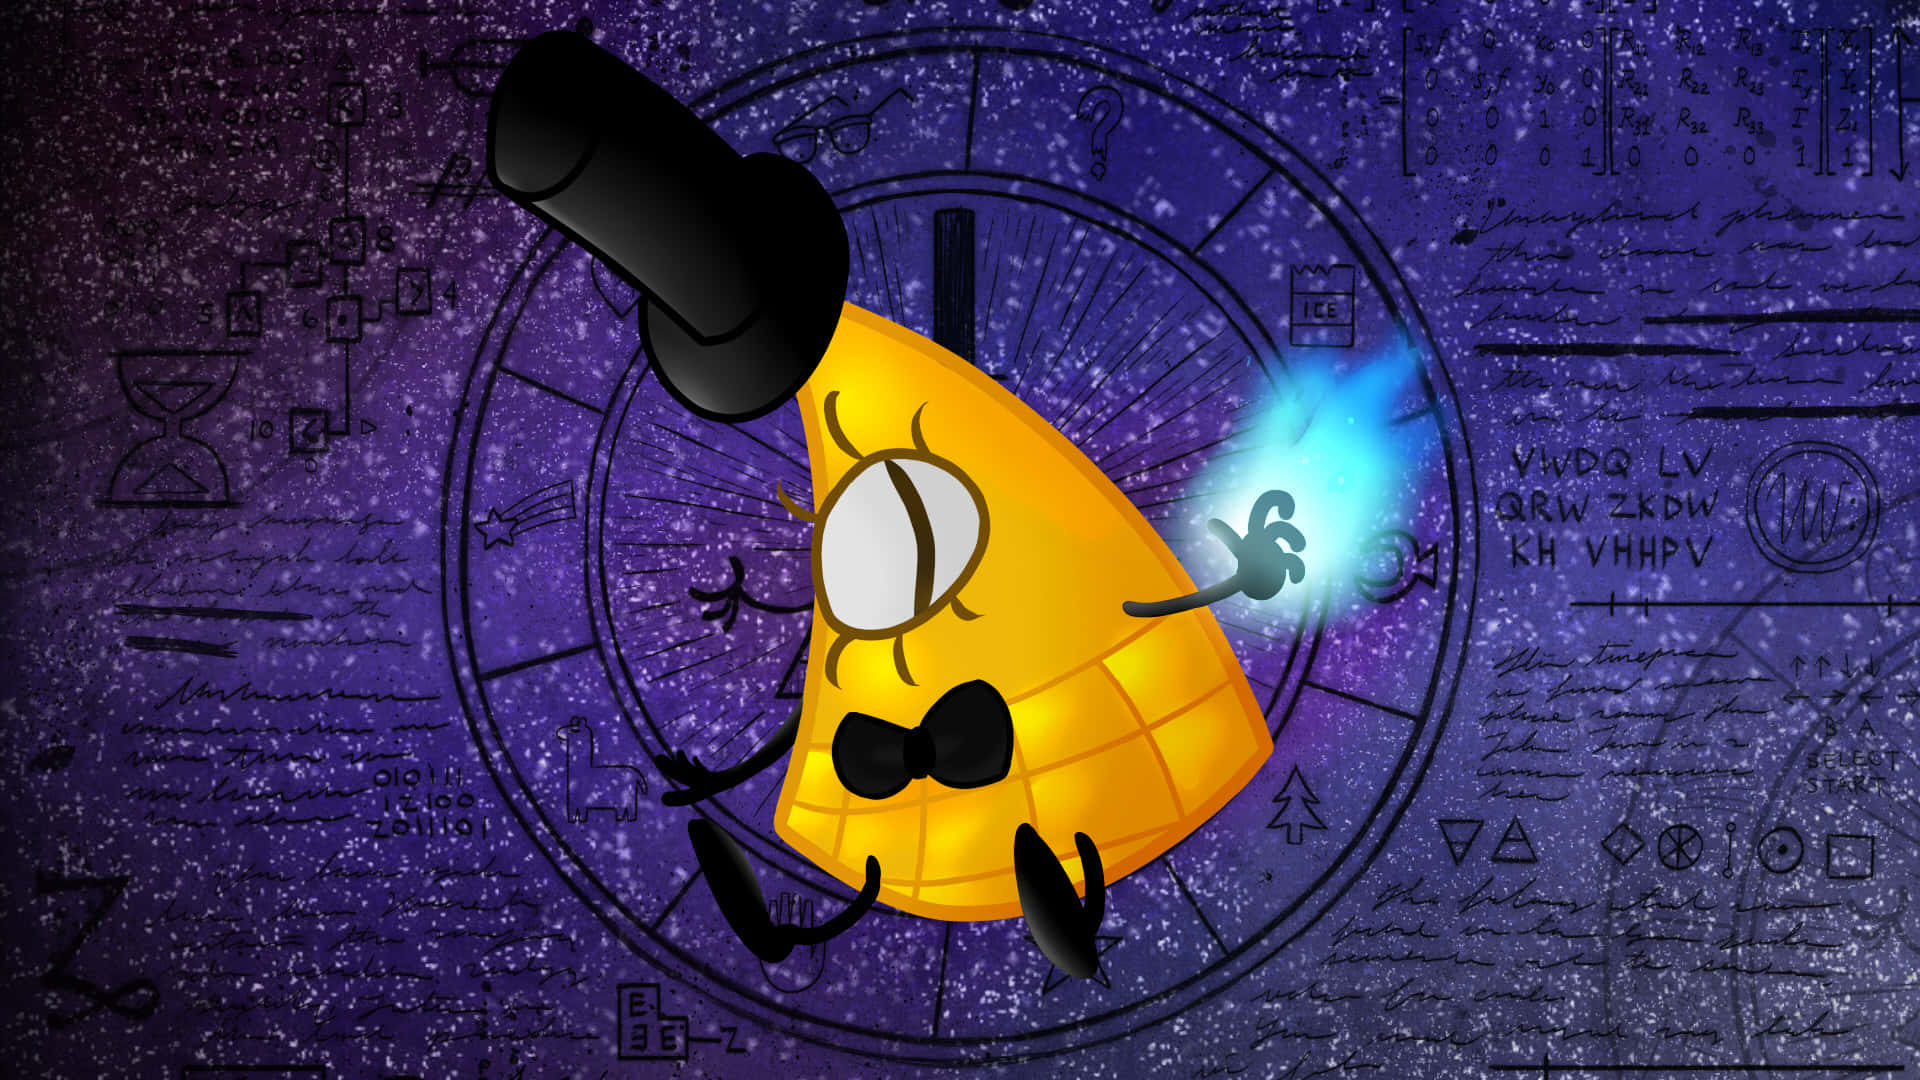 Enter a world of mystery with Bill Cipher and his secrets. Wallpaper